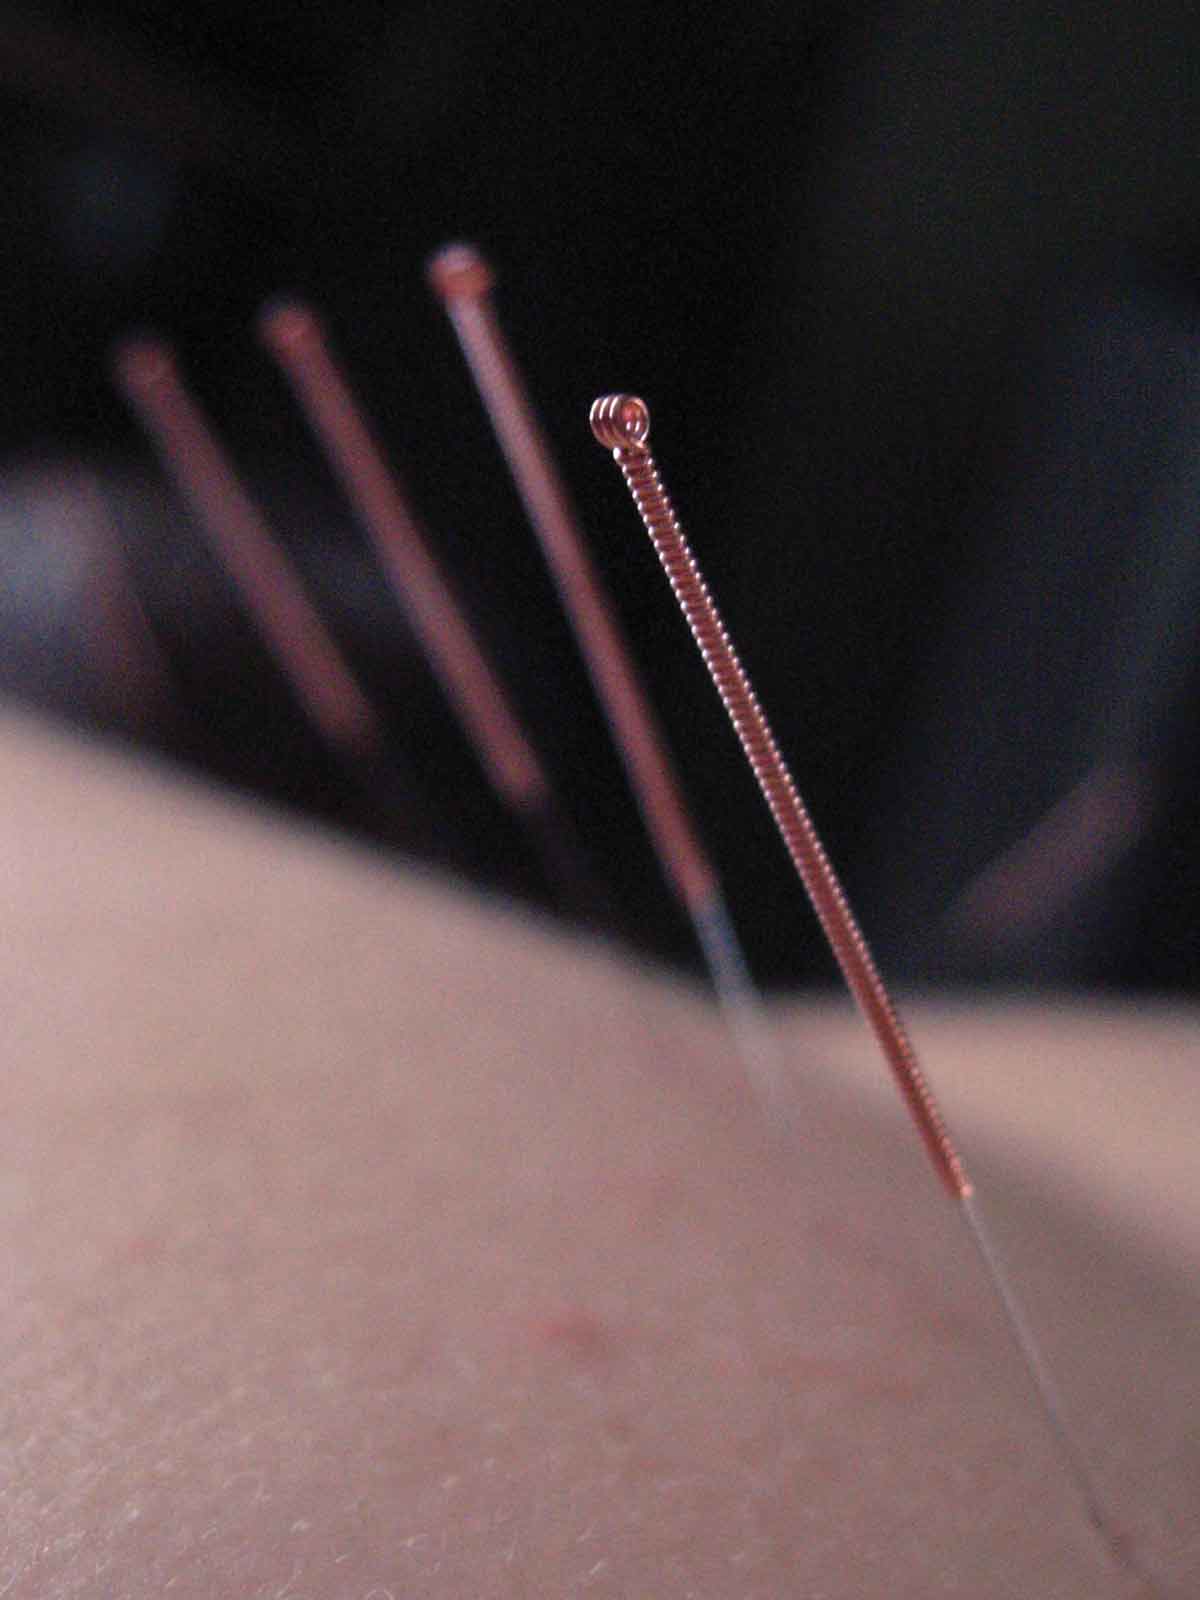 All Deep Acupuncture